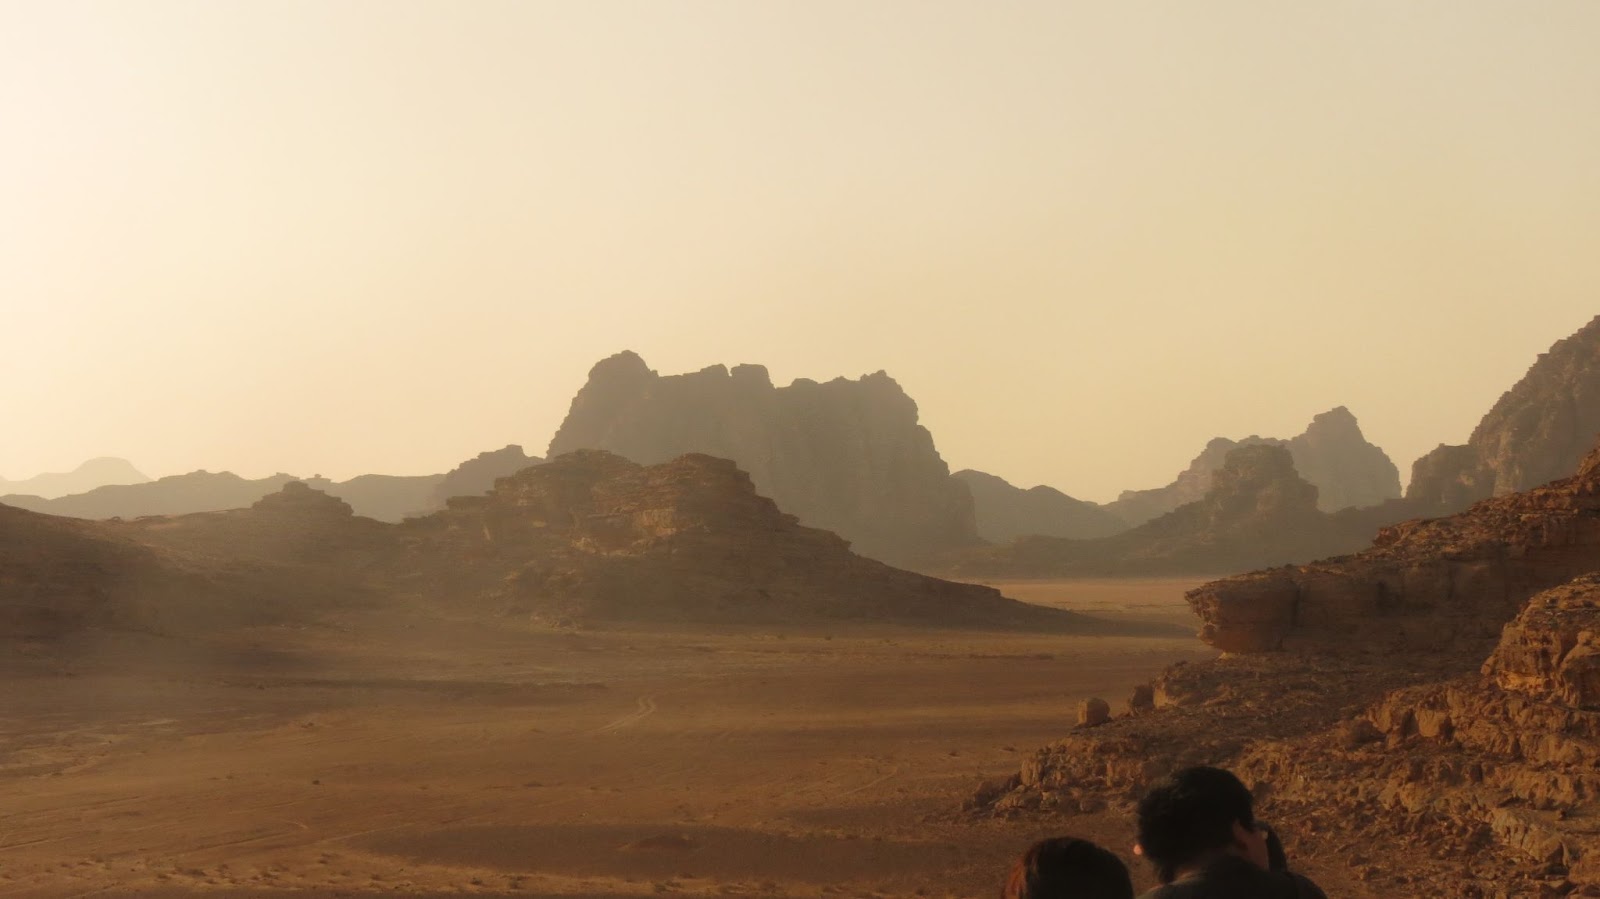 Haze covers a desert landscape of vast sand and rocky structures on the horizon.